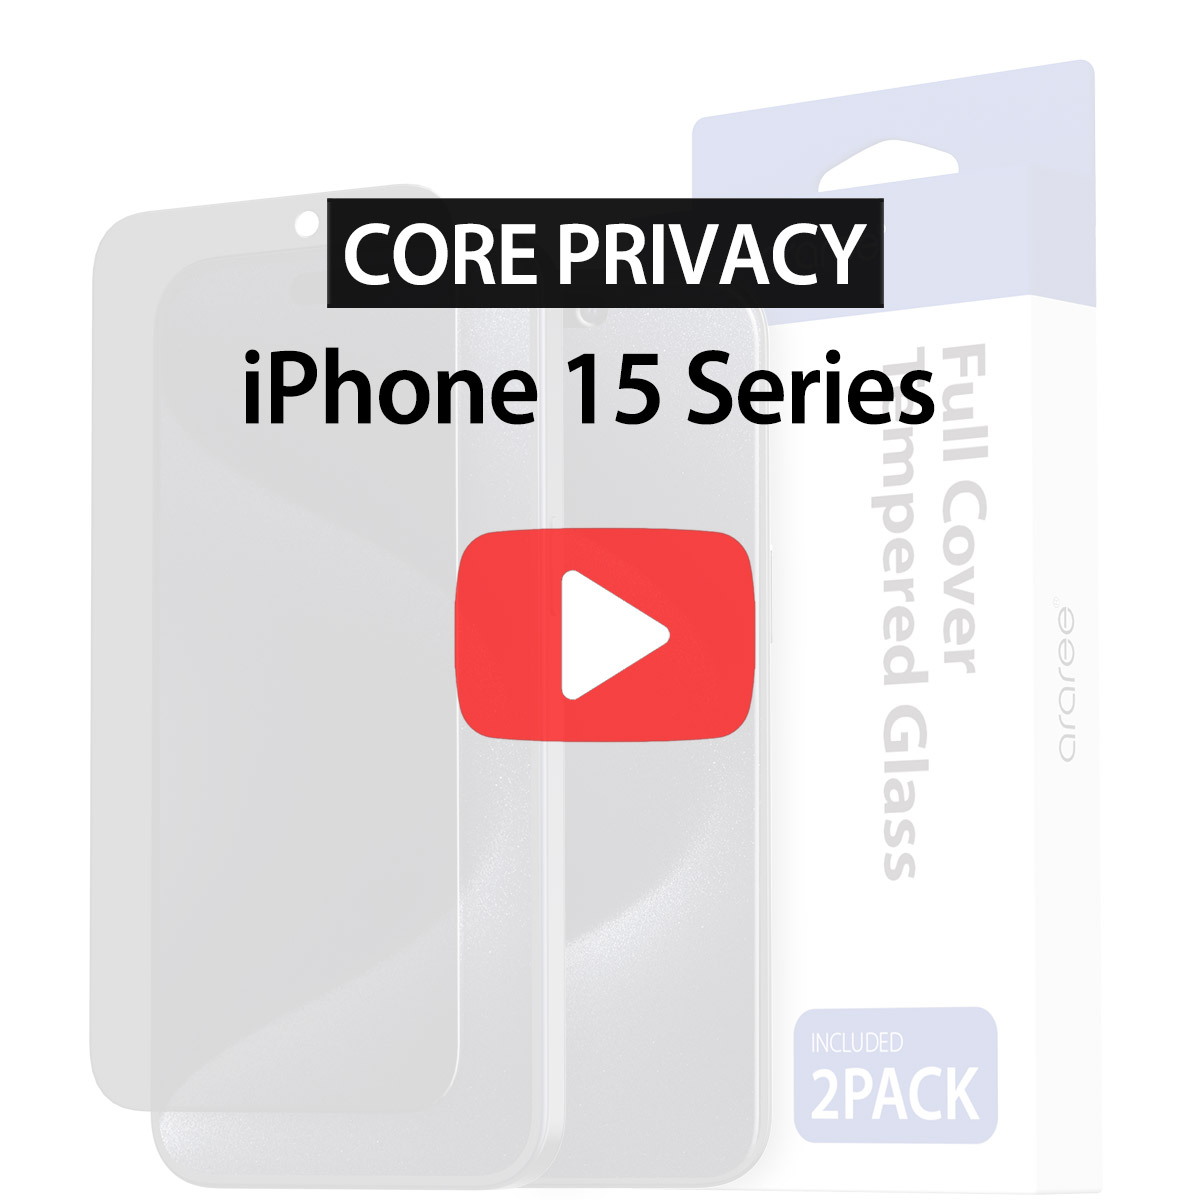 [iPhone 15 Series] CORE PRIVACY